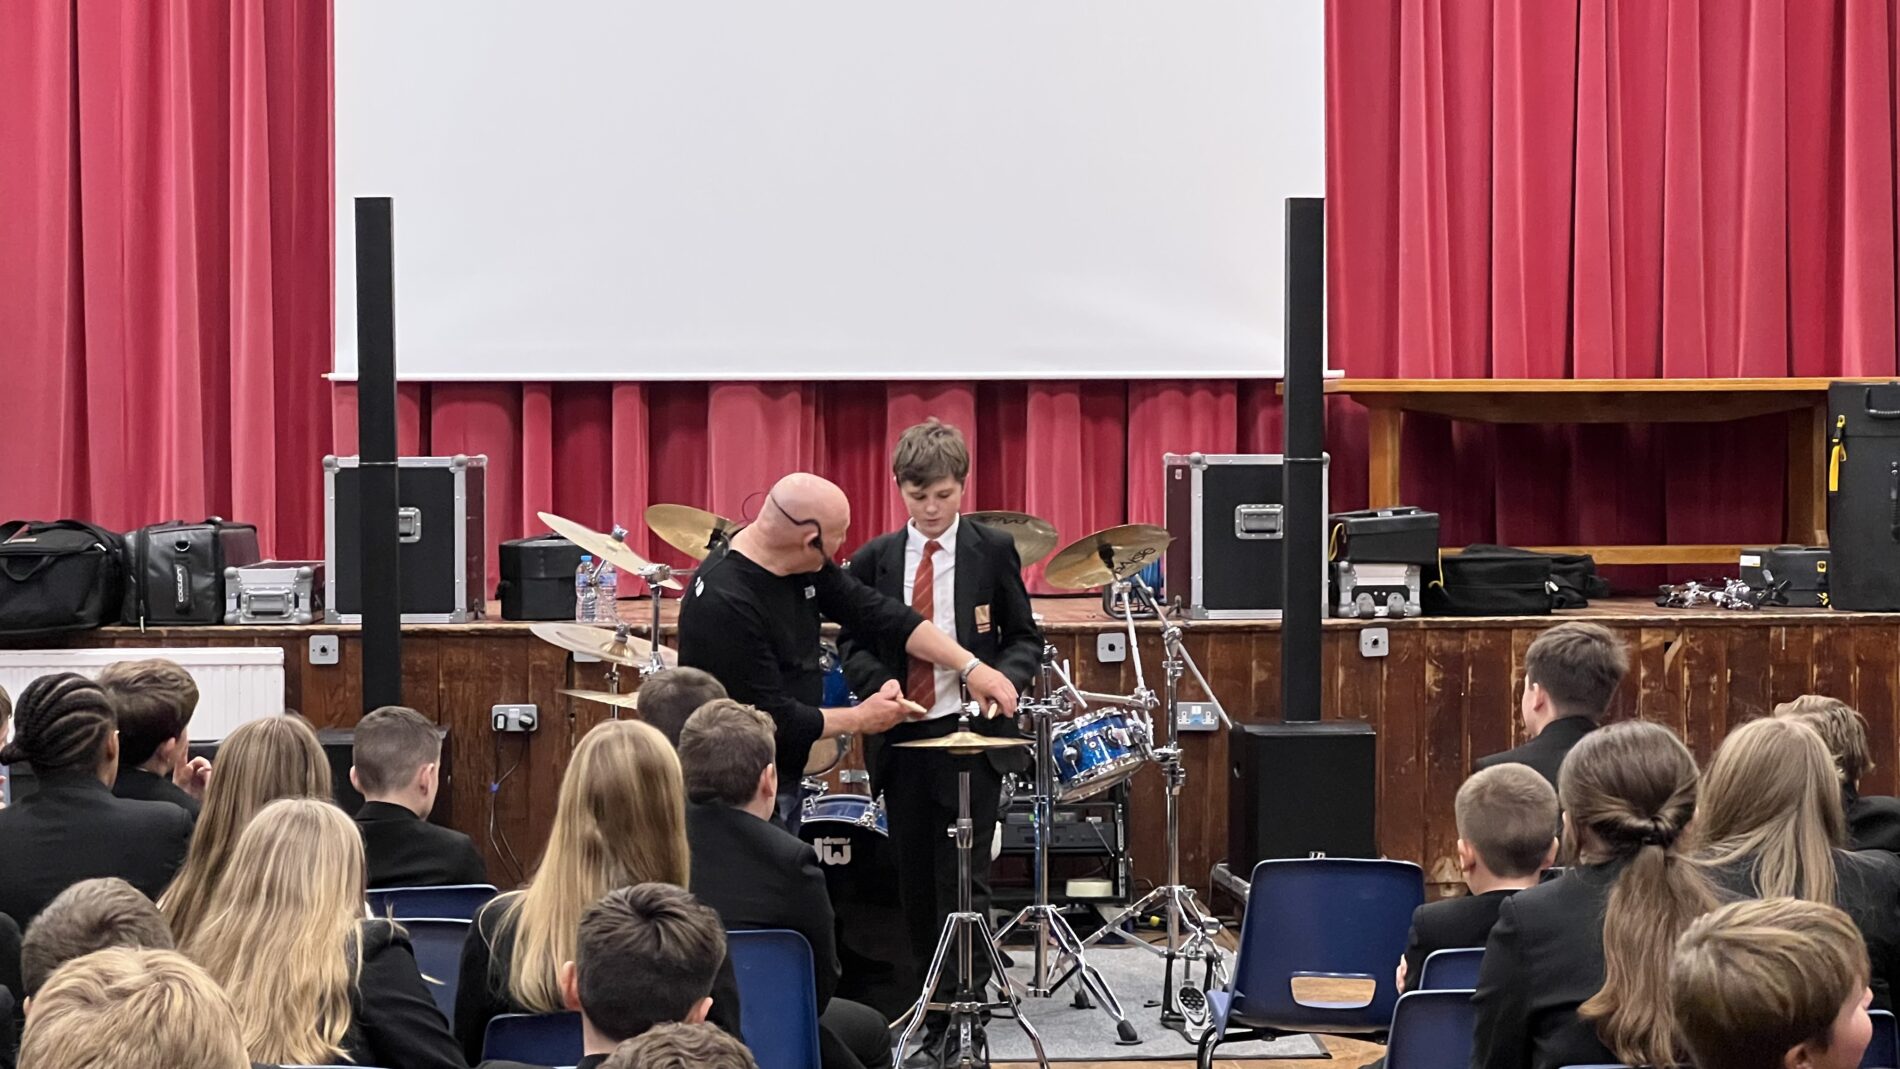 Jeff and student drumming together